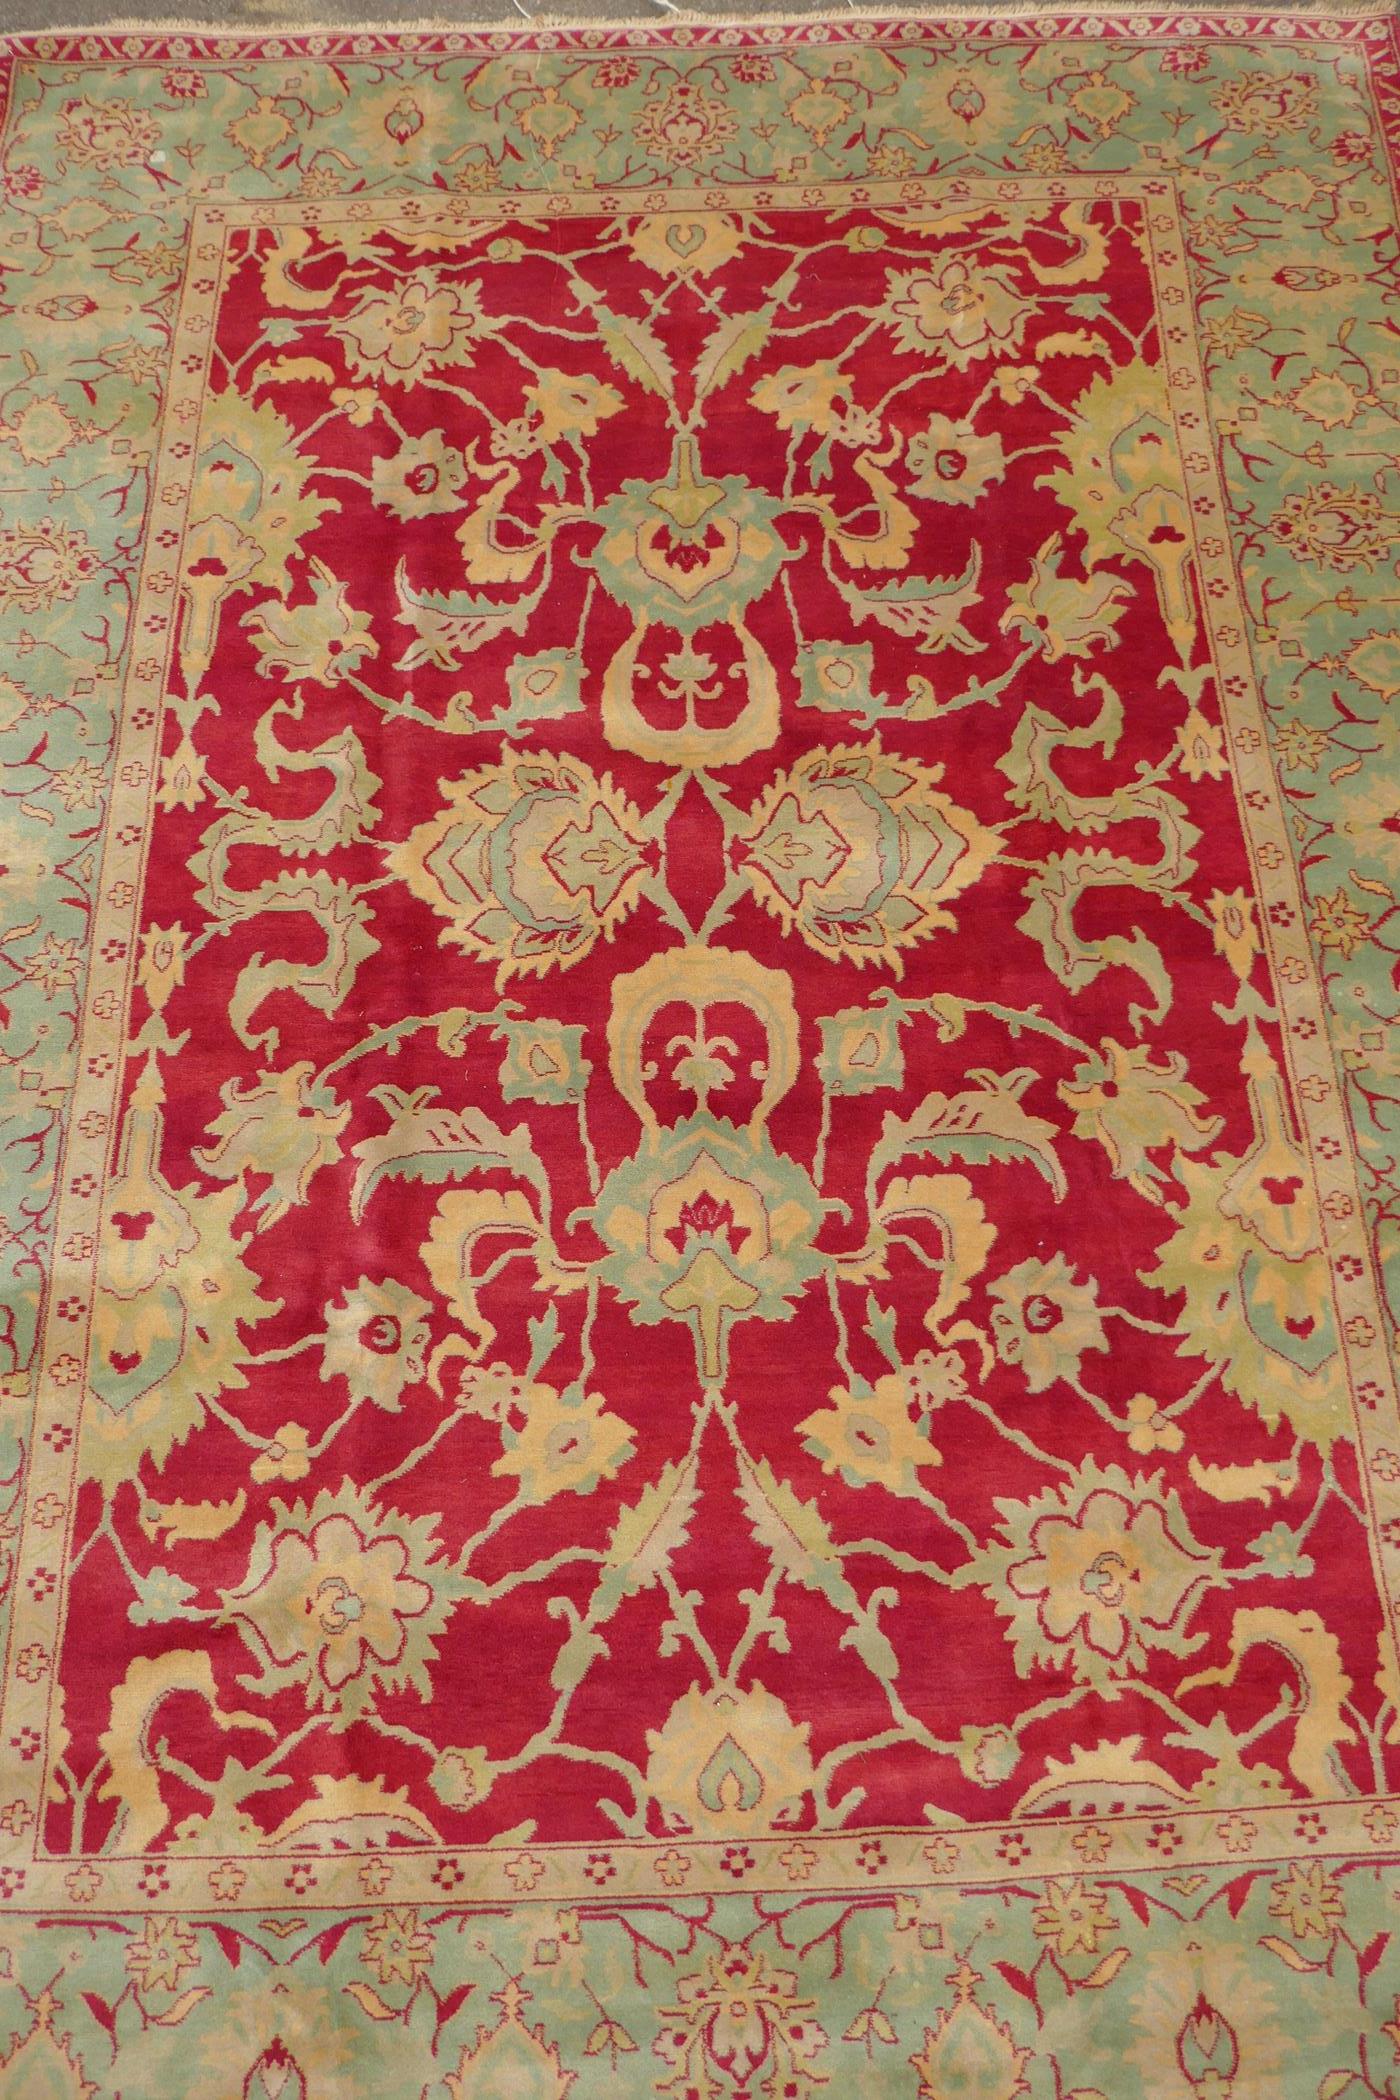 An antique red ground Agra carpet with floral design and olive green borders, AF wear, 108" x 140"